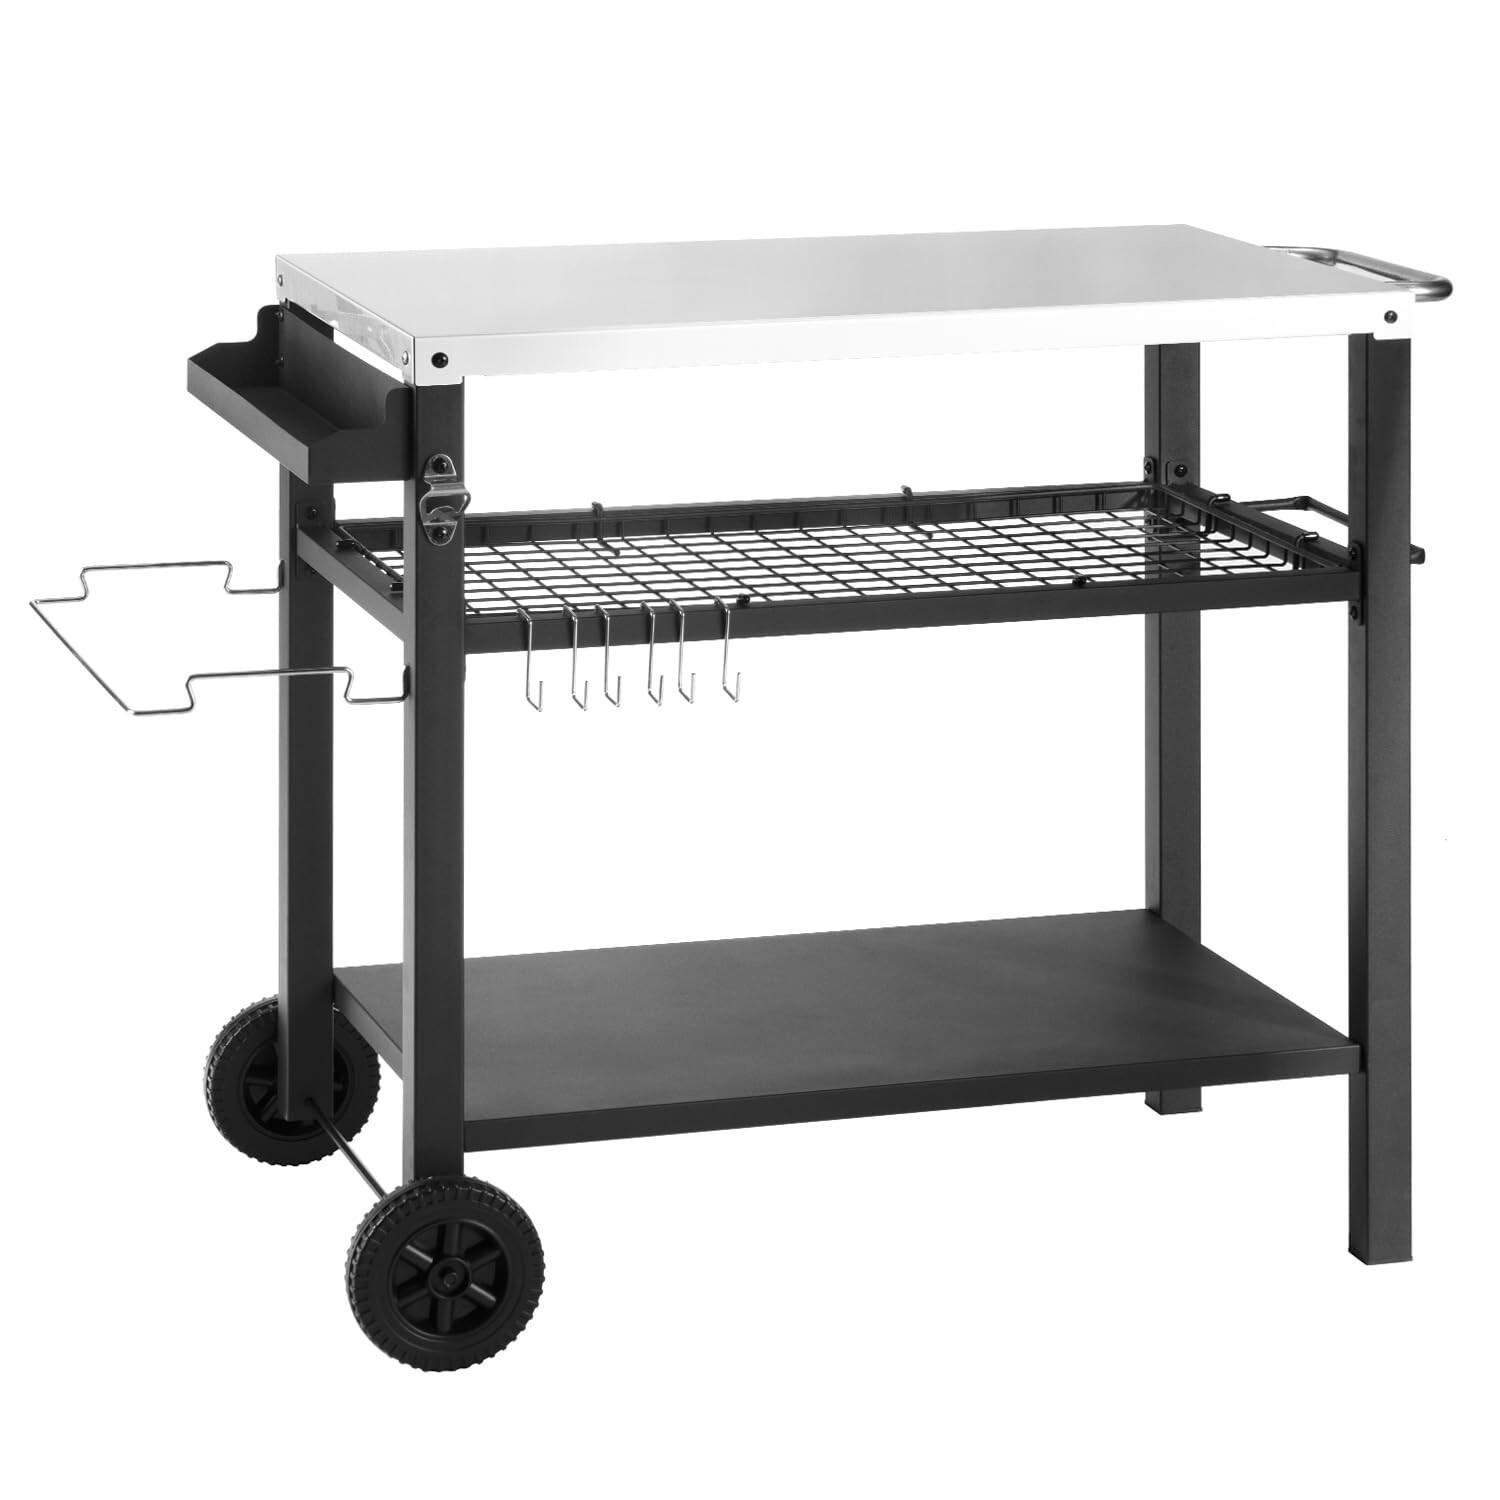 DNKMOR Dining Cart Table with Three Shelf, Movabl